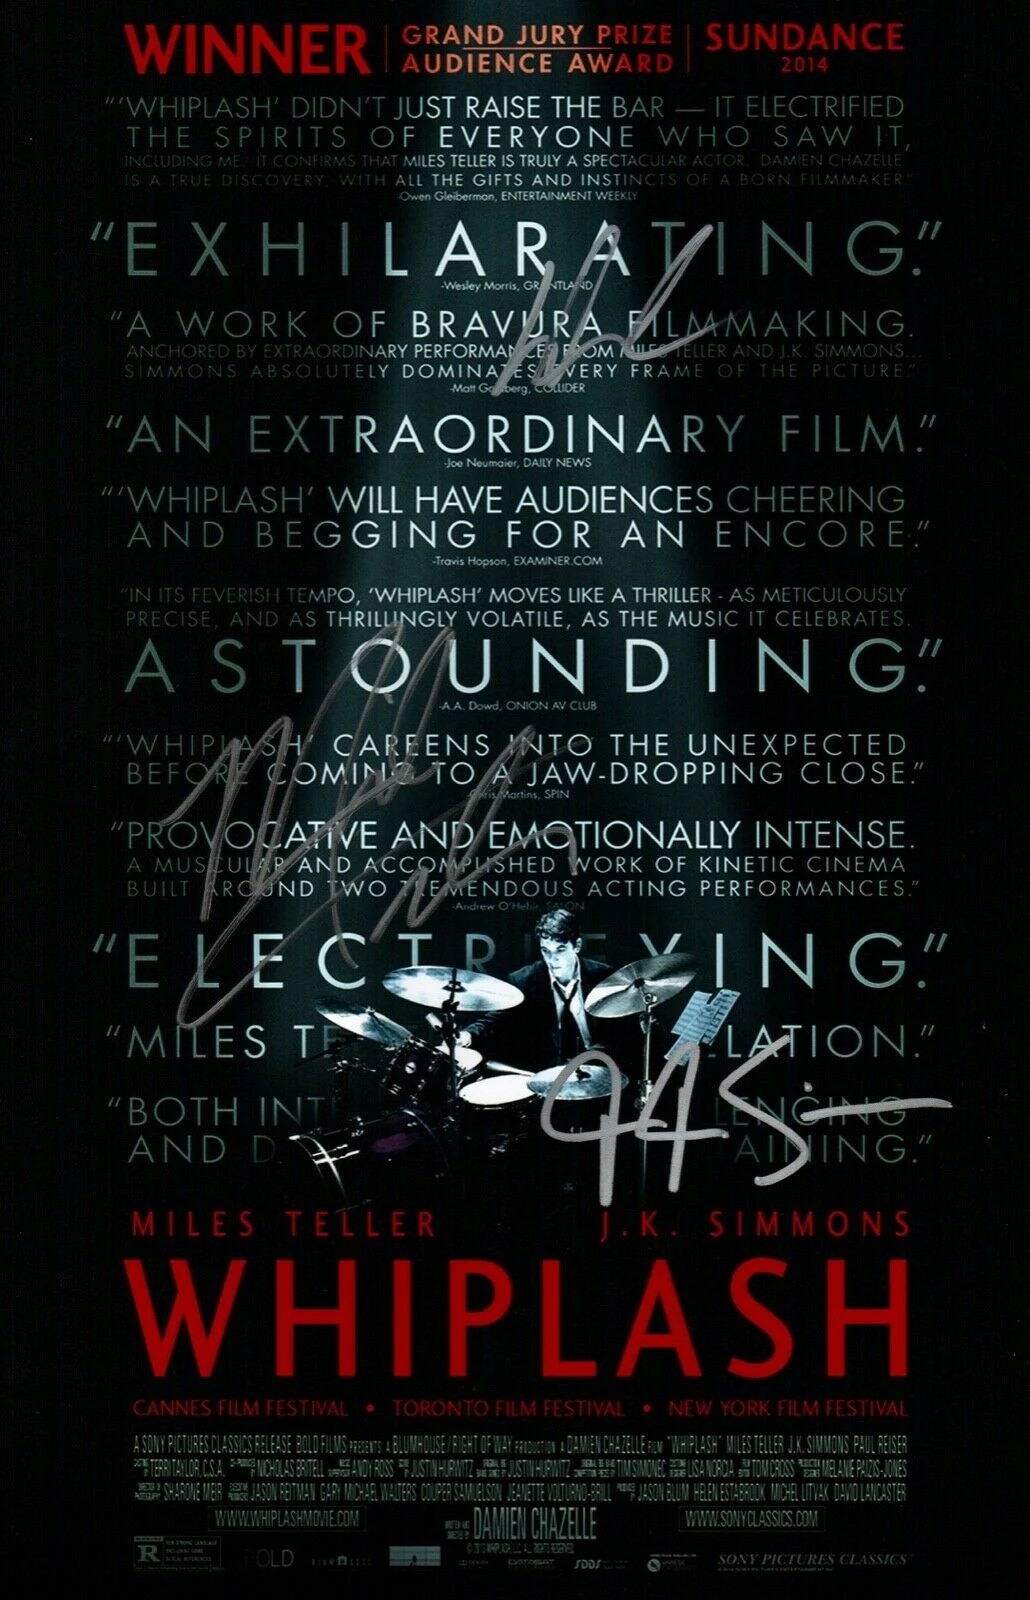 Miles Teller J.K. Simmons & Damien Chazelle Whiplash Signed Poster Photo Printing Wallpaper Home Decoration Painting. Painting & Calligraphy